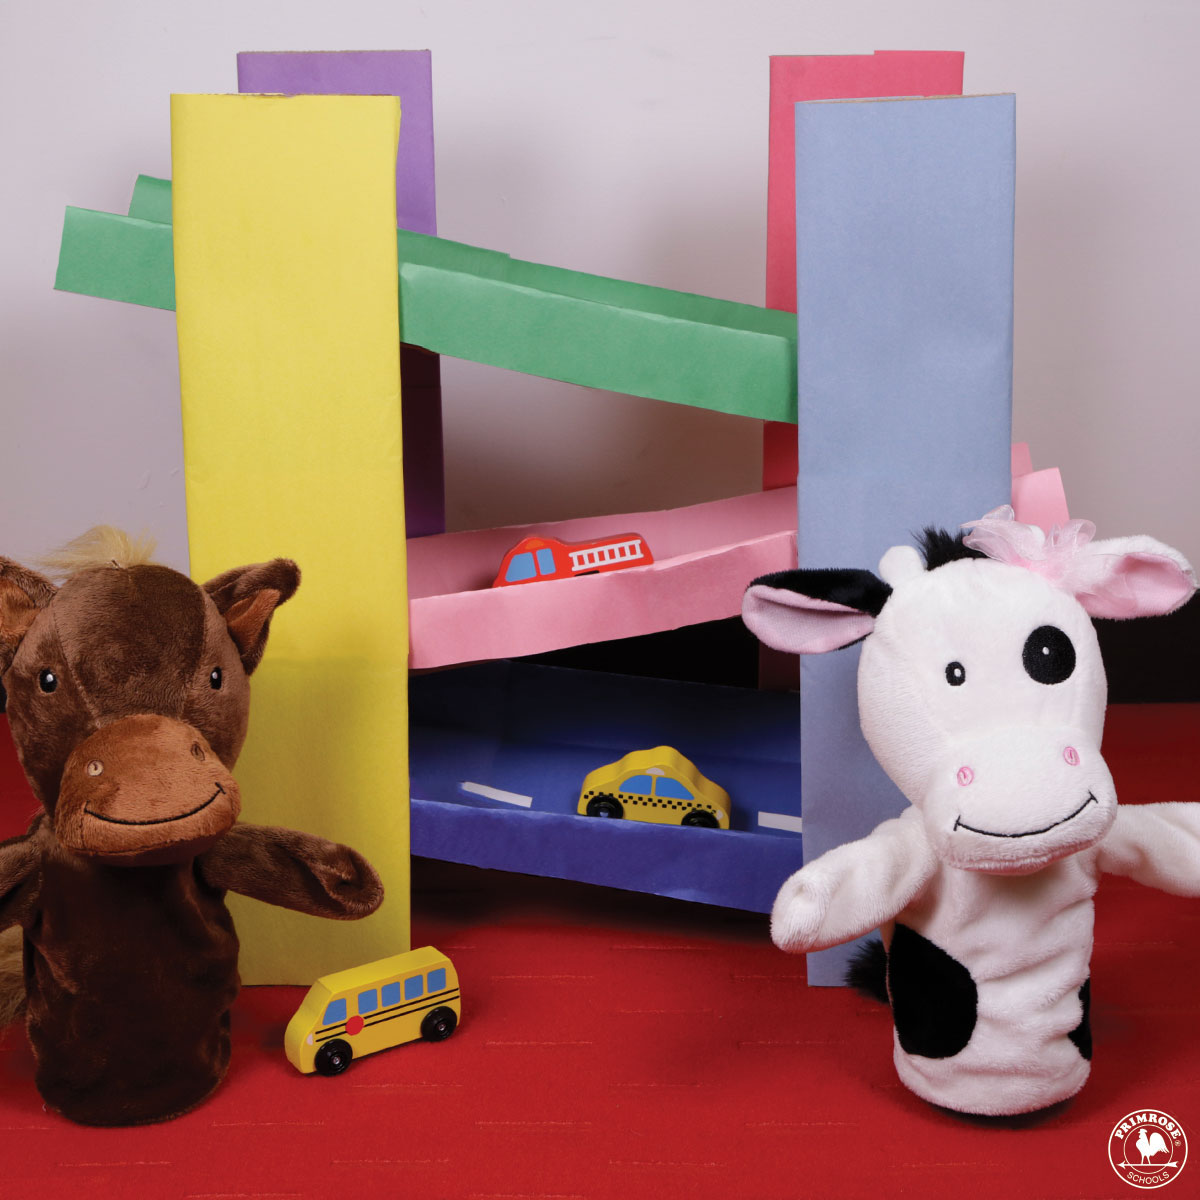 Primrose puppets Peanut the Pony and Molly the cow stand next to a homemade racetrack